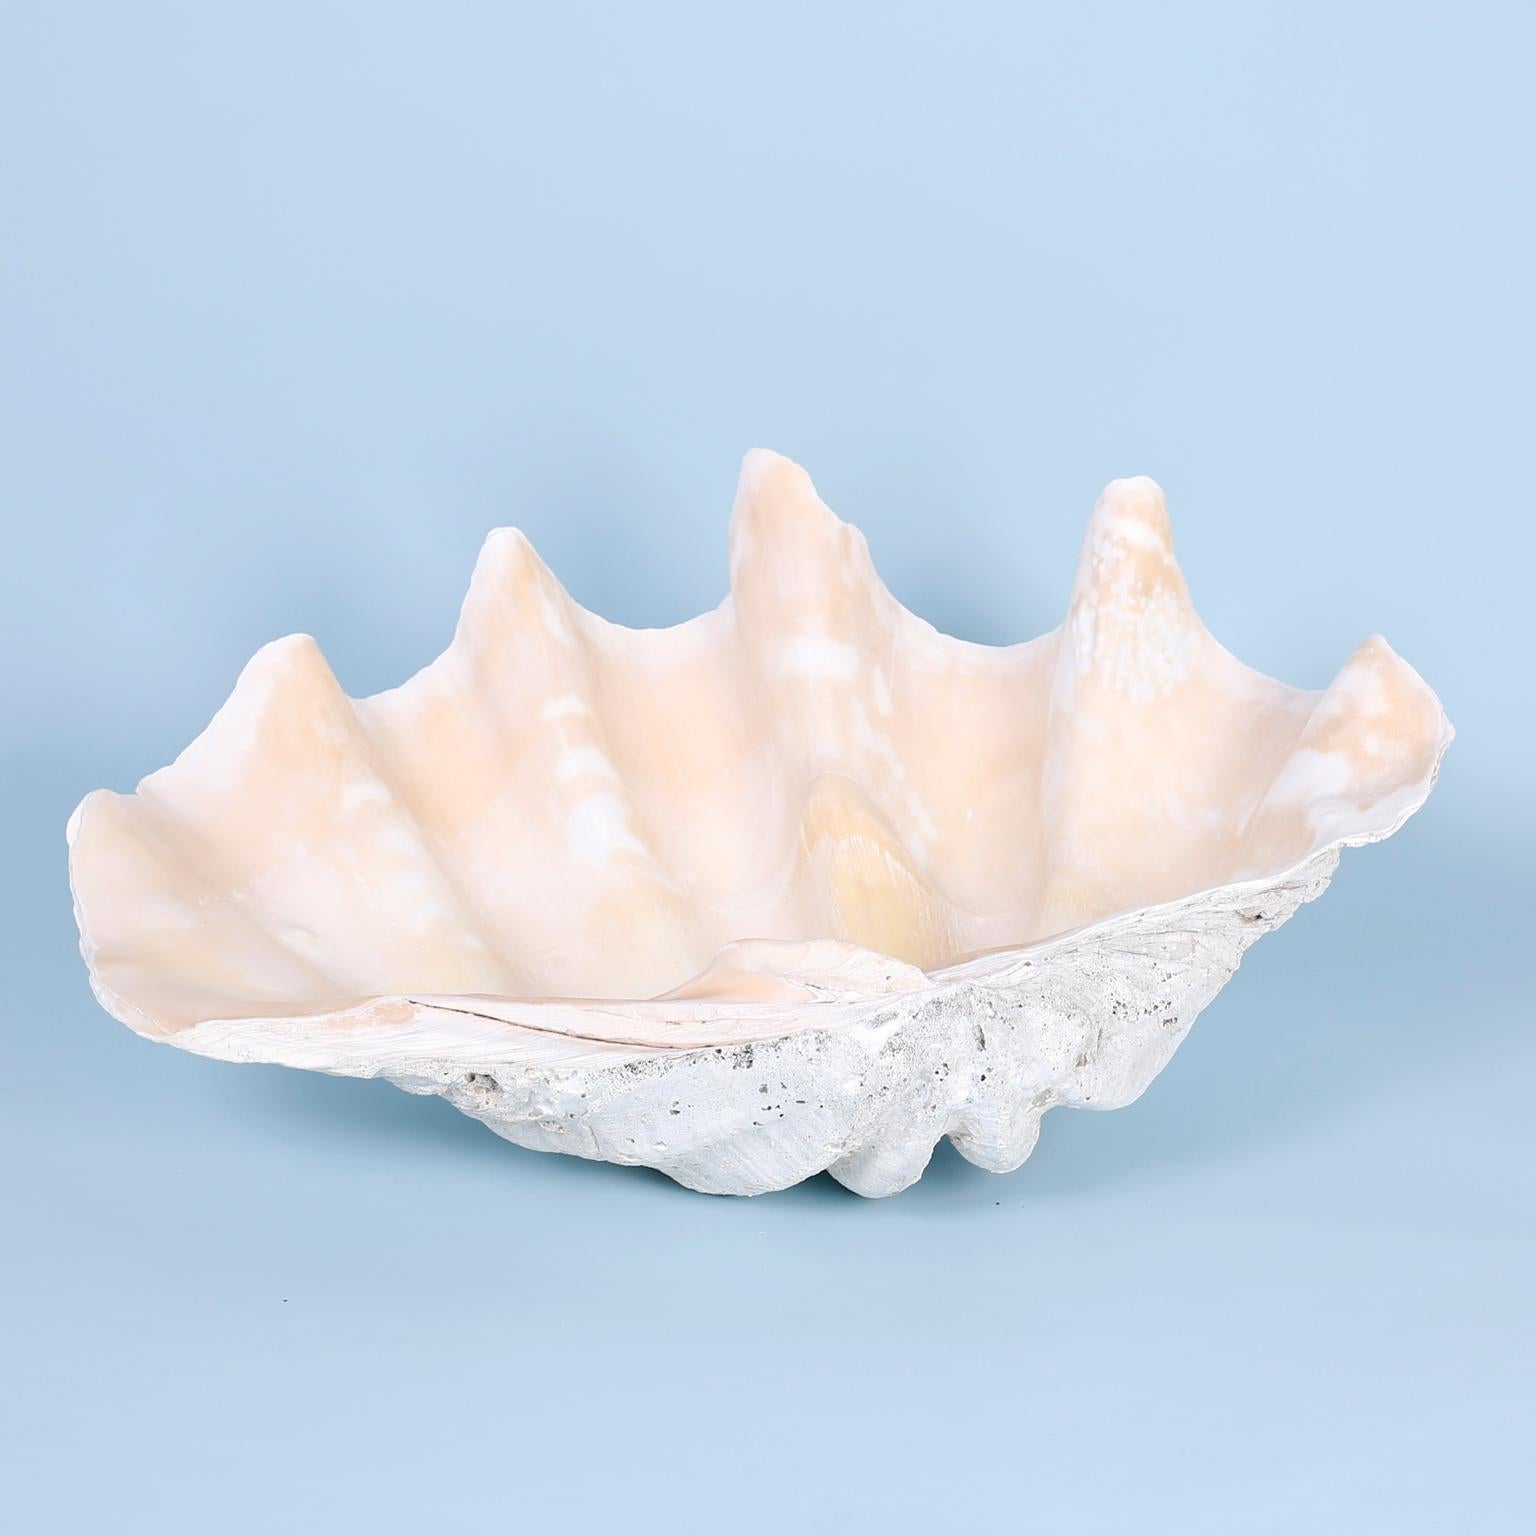 Giant clam shell specimen with its iconic sculptural form and sea inspired colors and textures.